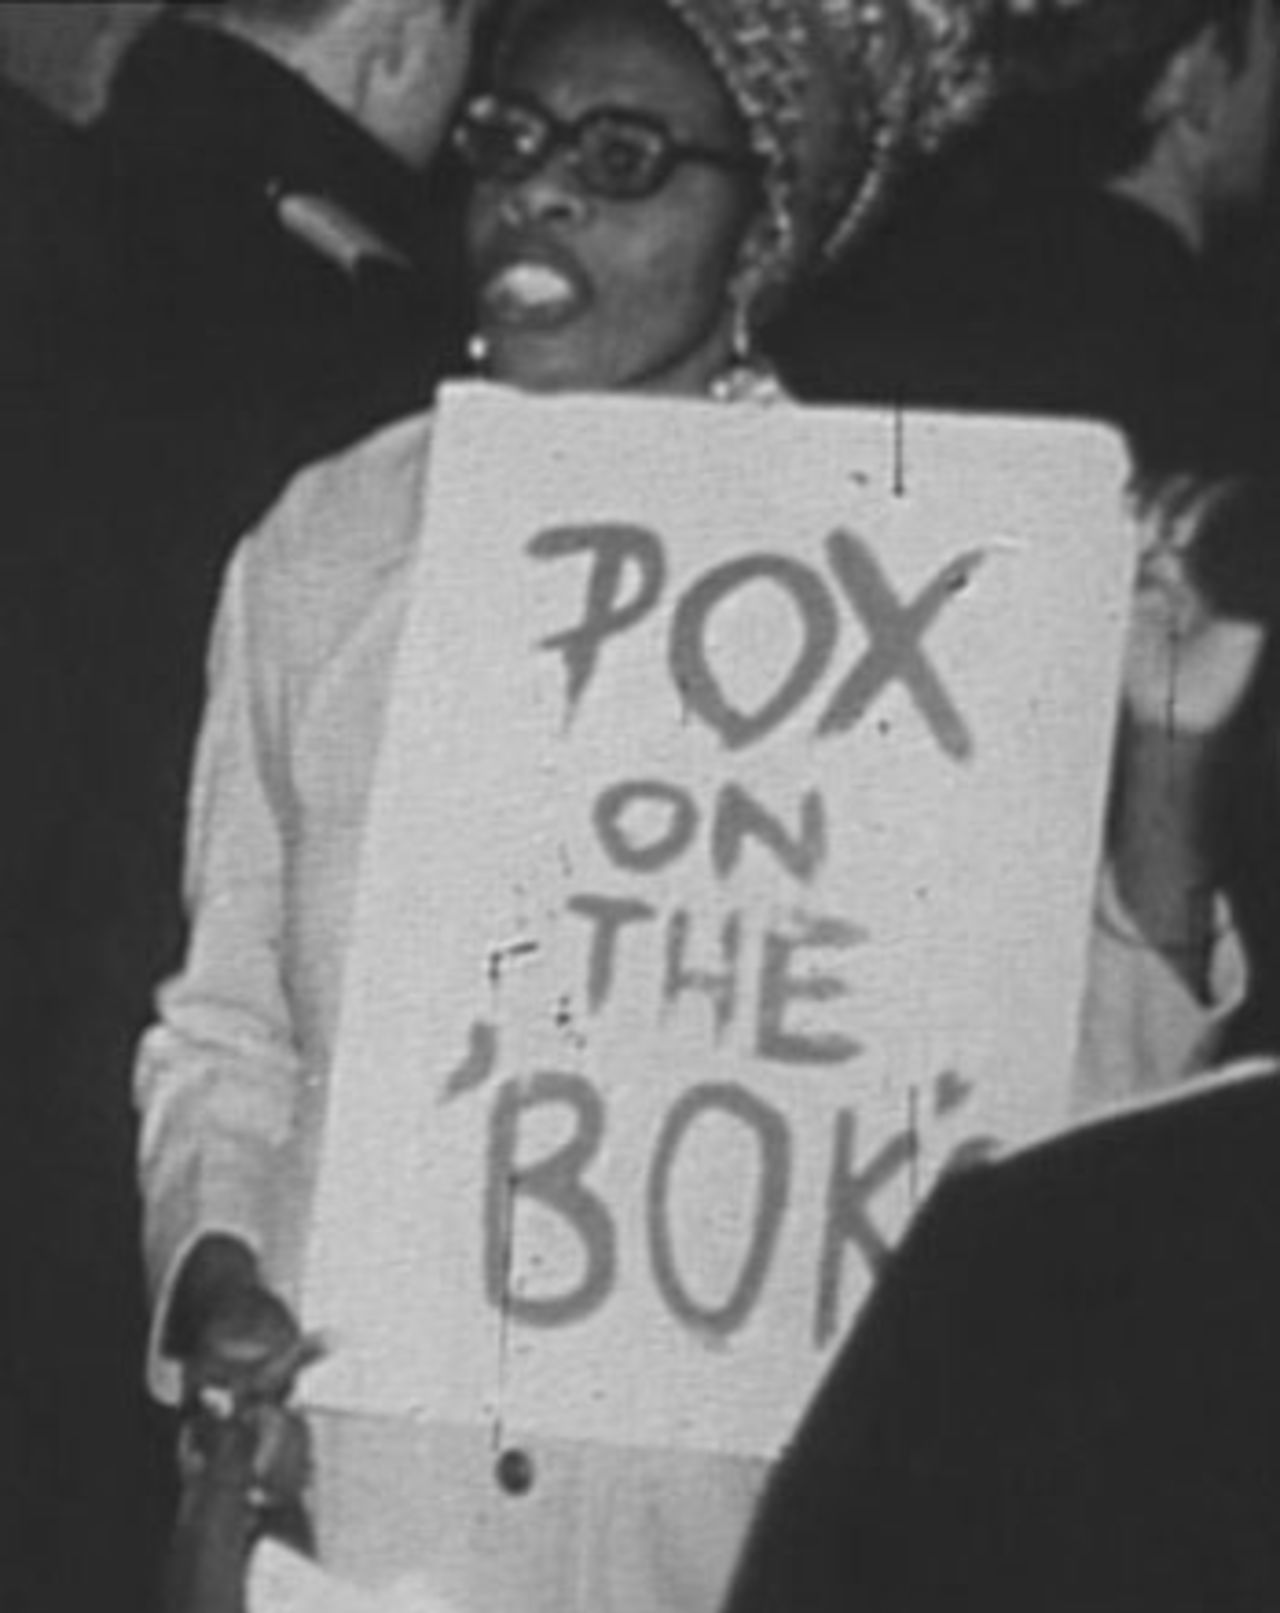 Australians protests against South Africa in 1970